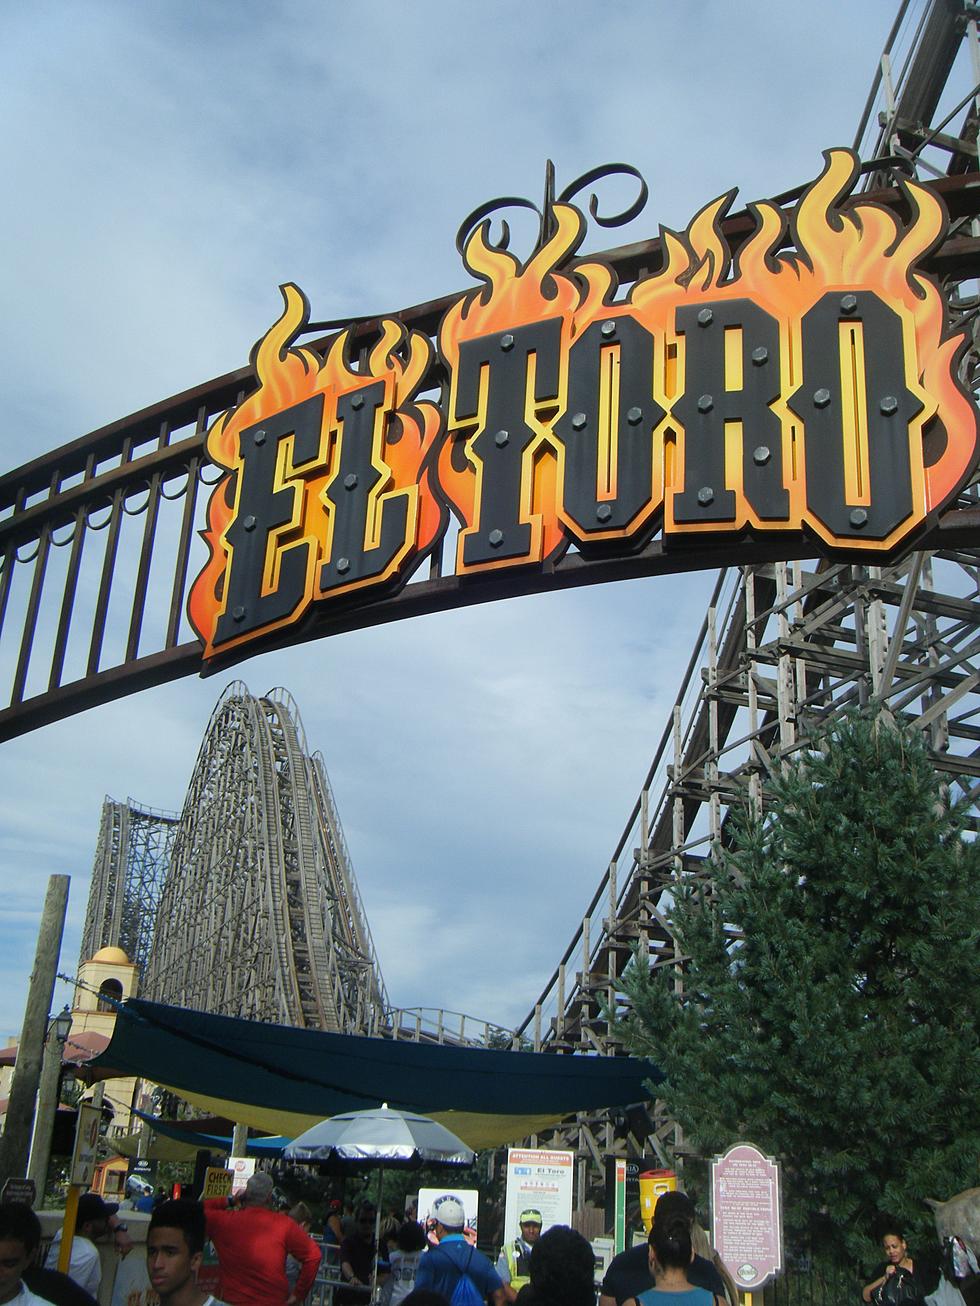 Six Flags Great Adventure Announces “Coaster Power Hours” in Jackson, NJ[Photo Gallery]